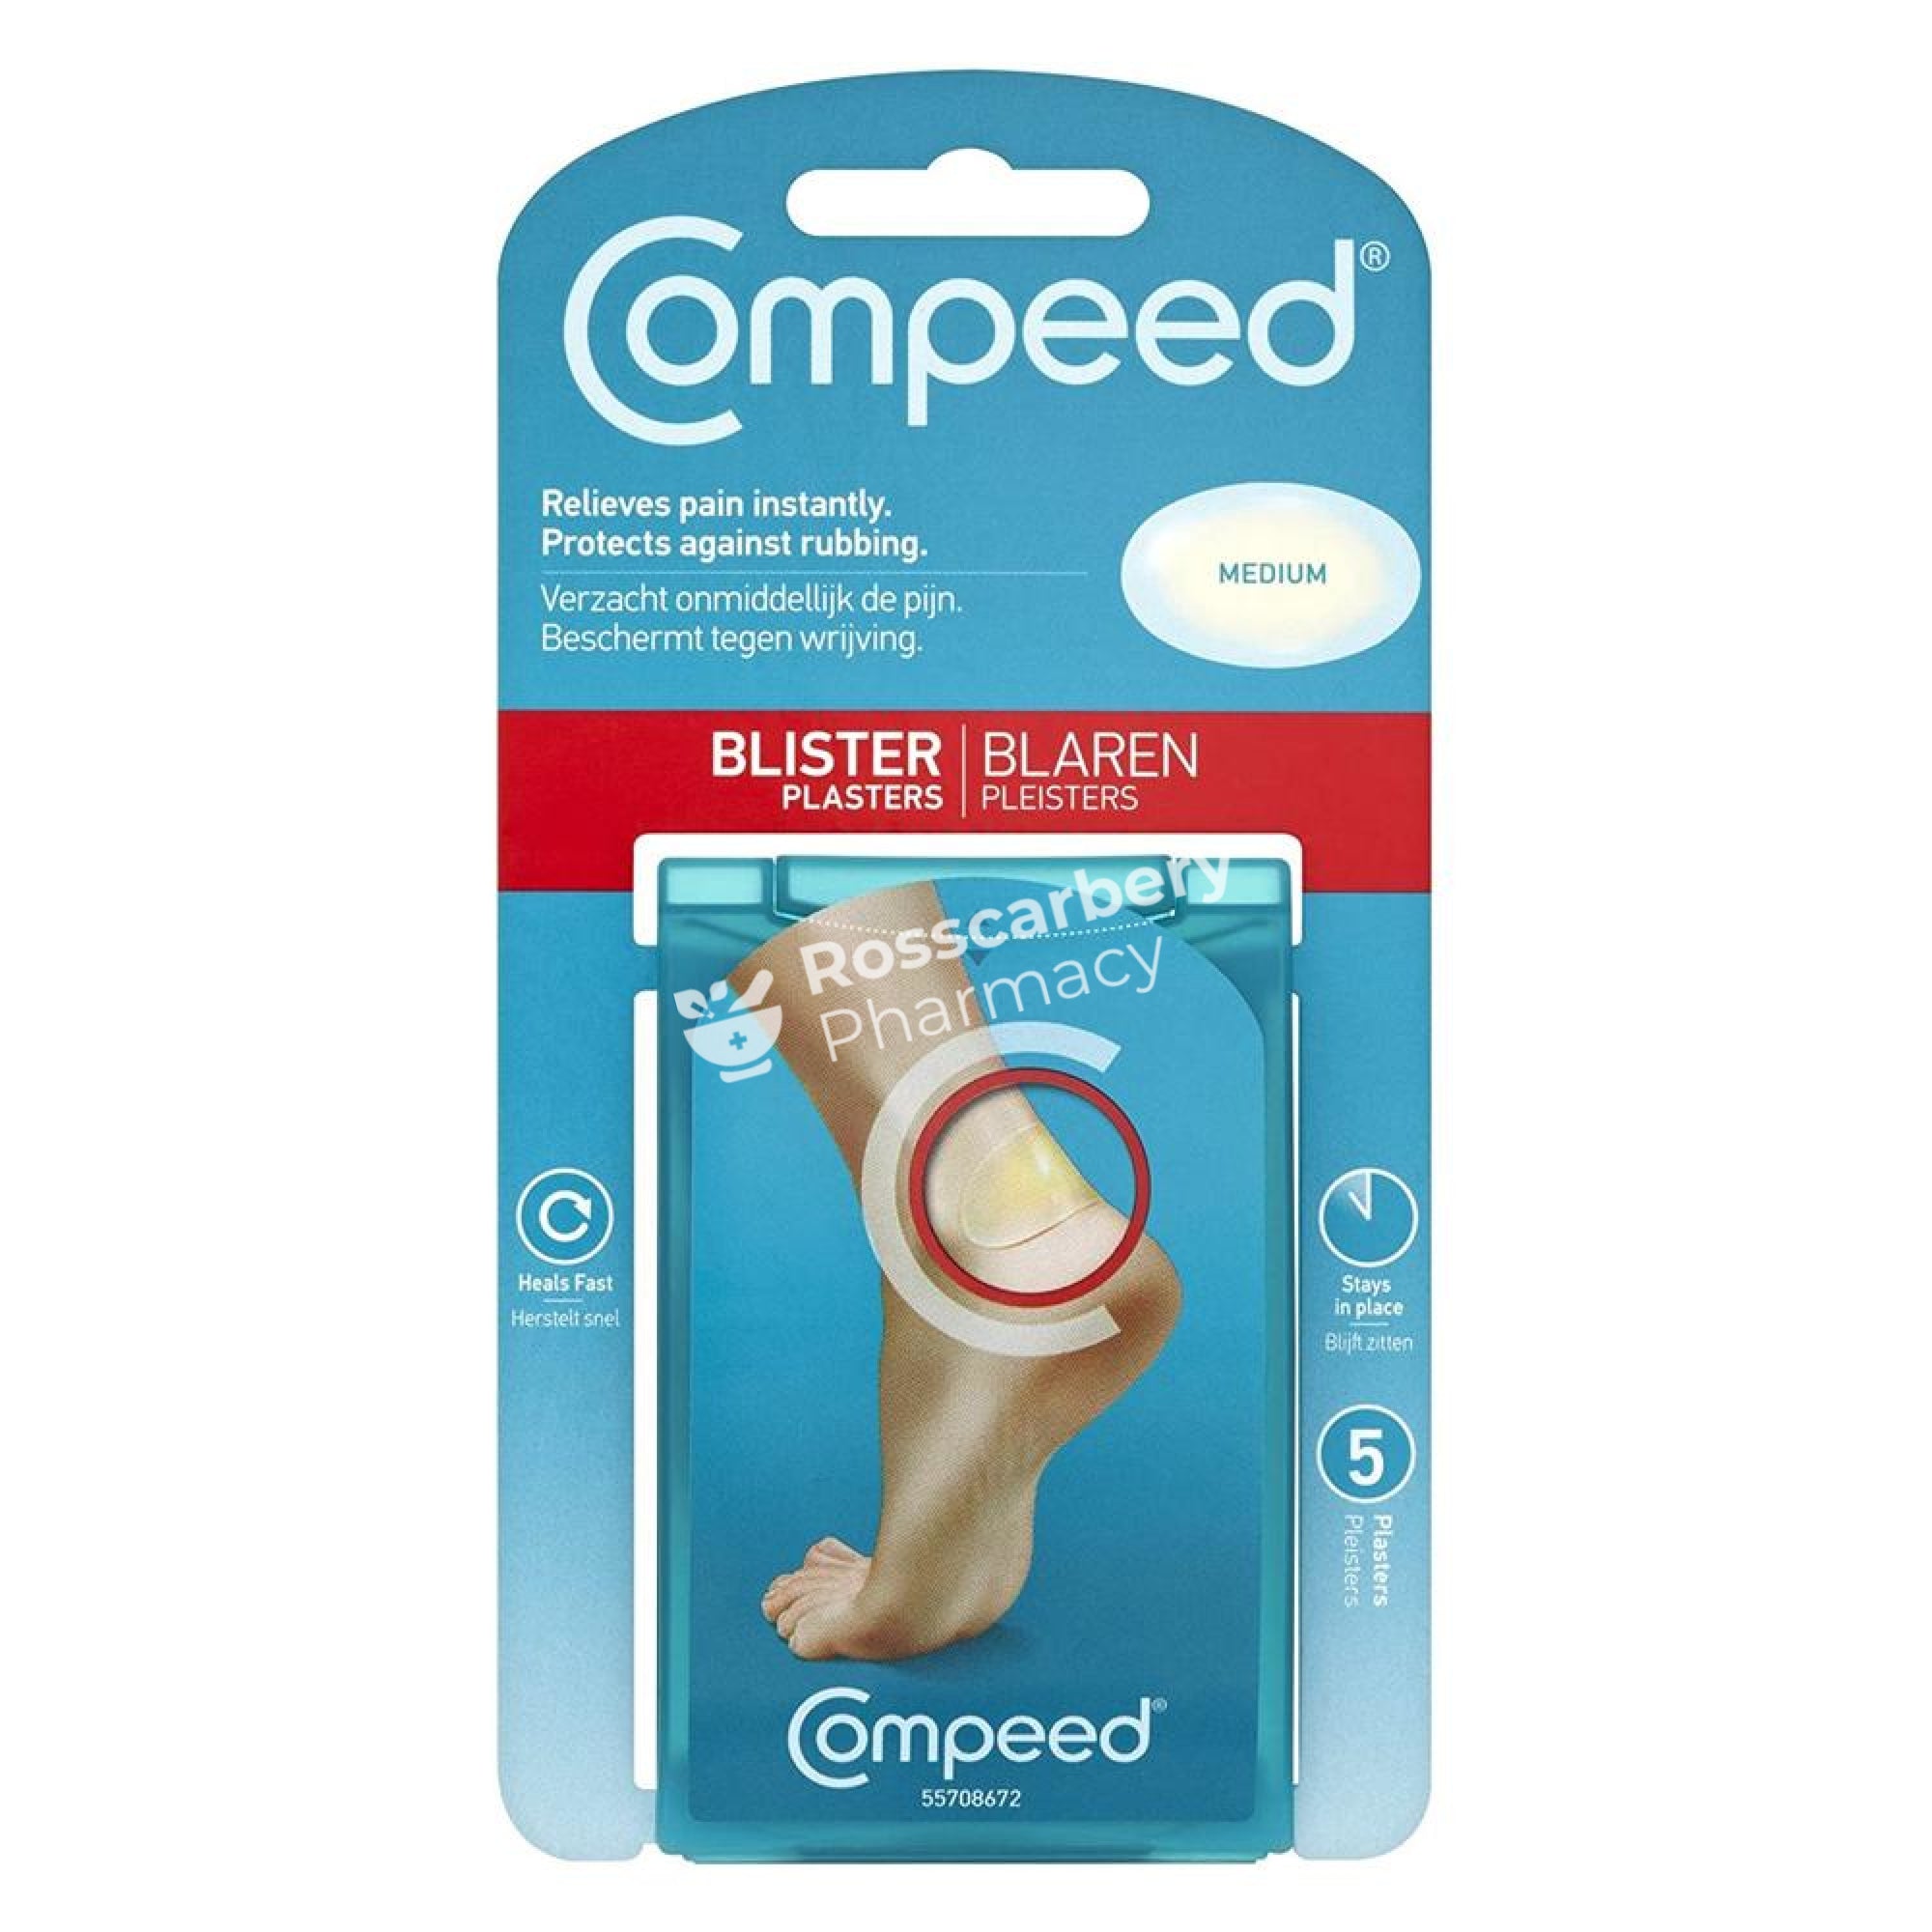 Compeed Blister Plasters - Medium Blisters & Bunion Care